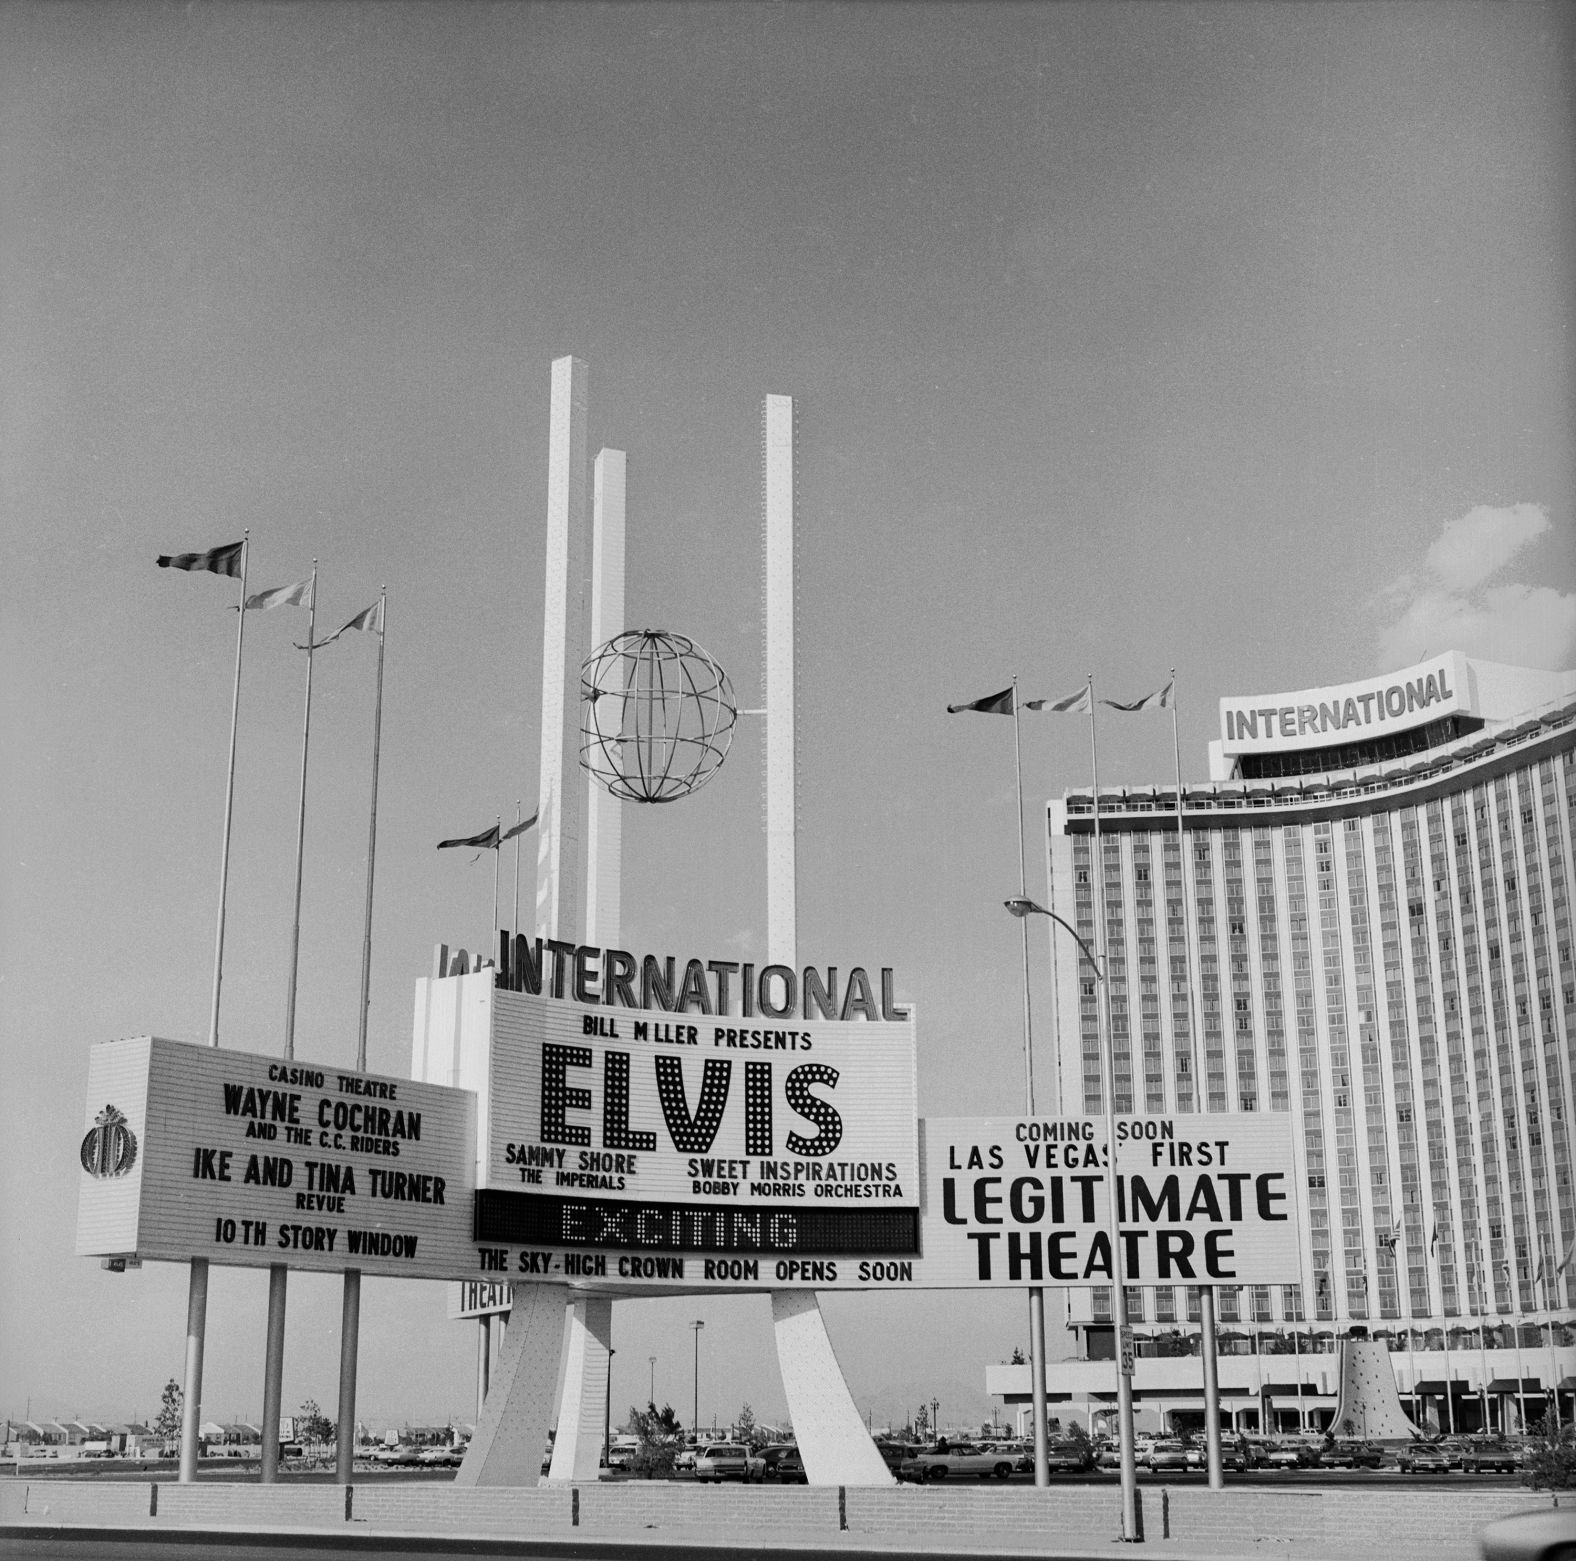 The International Hotel's marquee advertises Presley, its headline performer, in 1969. Presley performed 57 shows, usually two a day, at the new hotel that summer. When it opened, it was the largest hotel in the world.